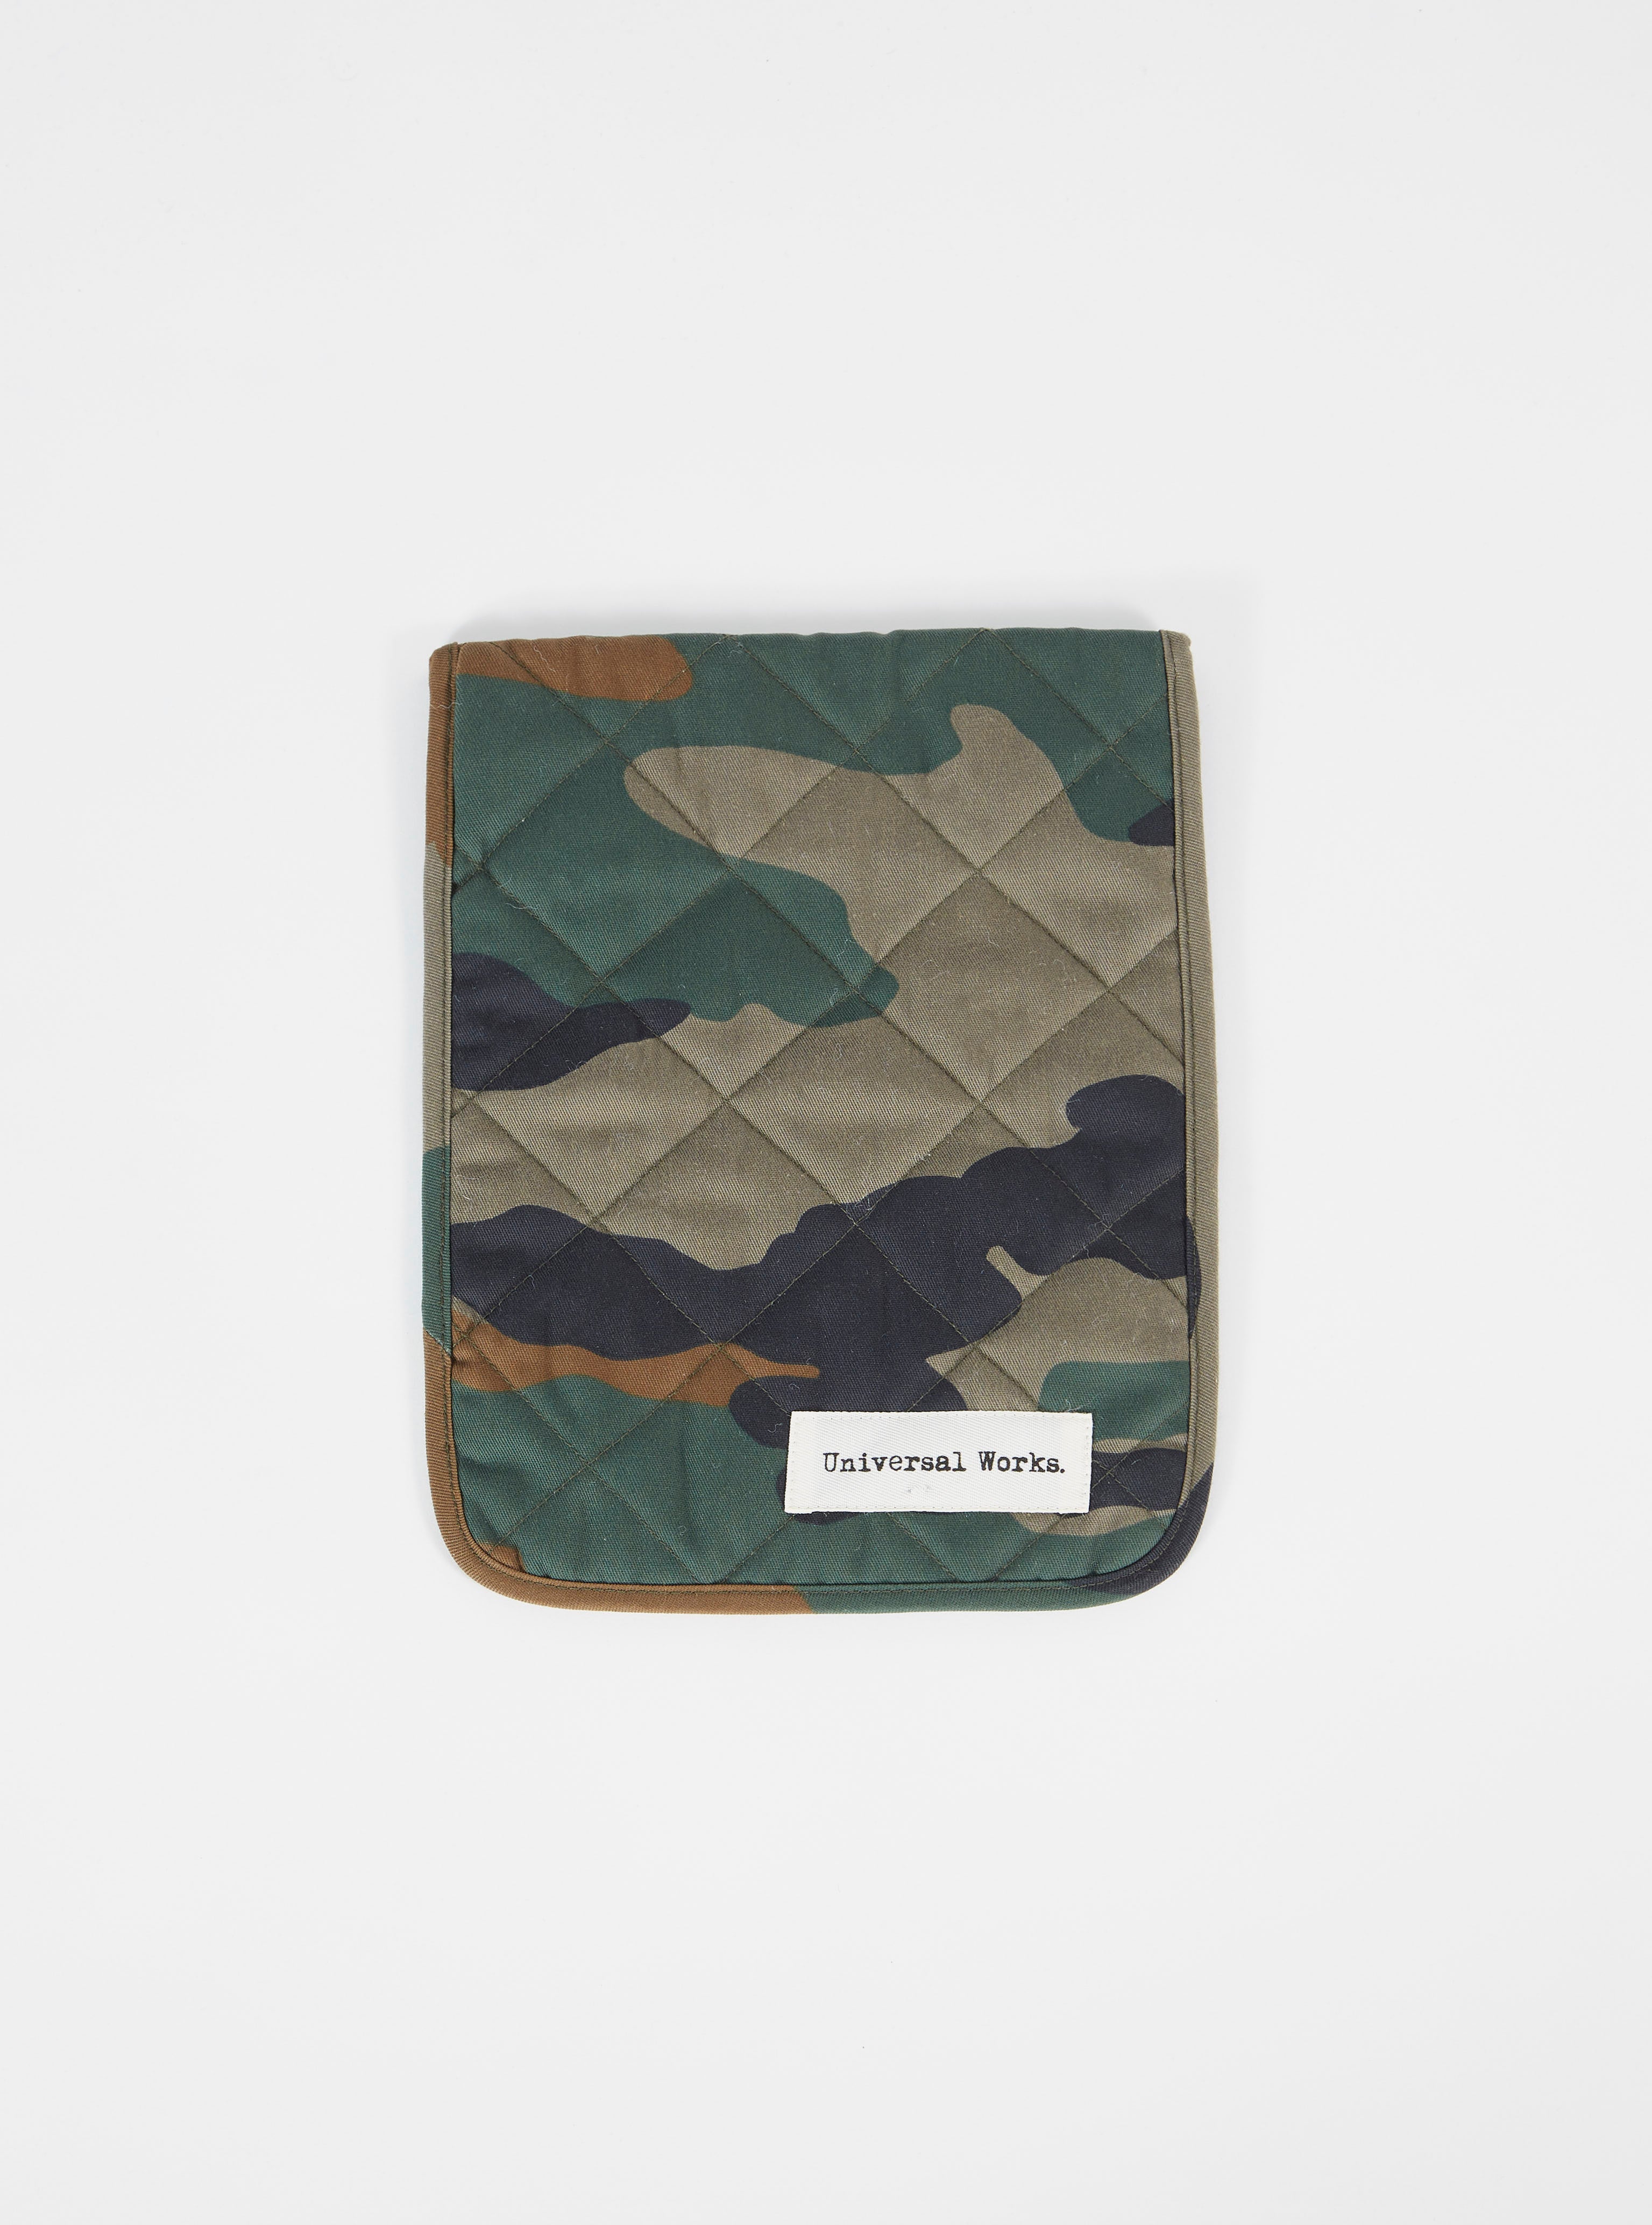 Universal Works iPad Case In Olive Camo Twill